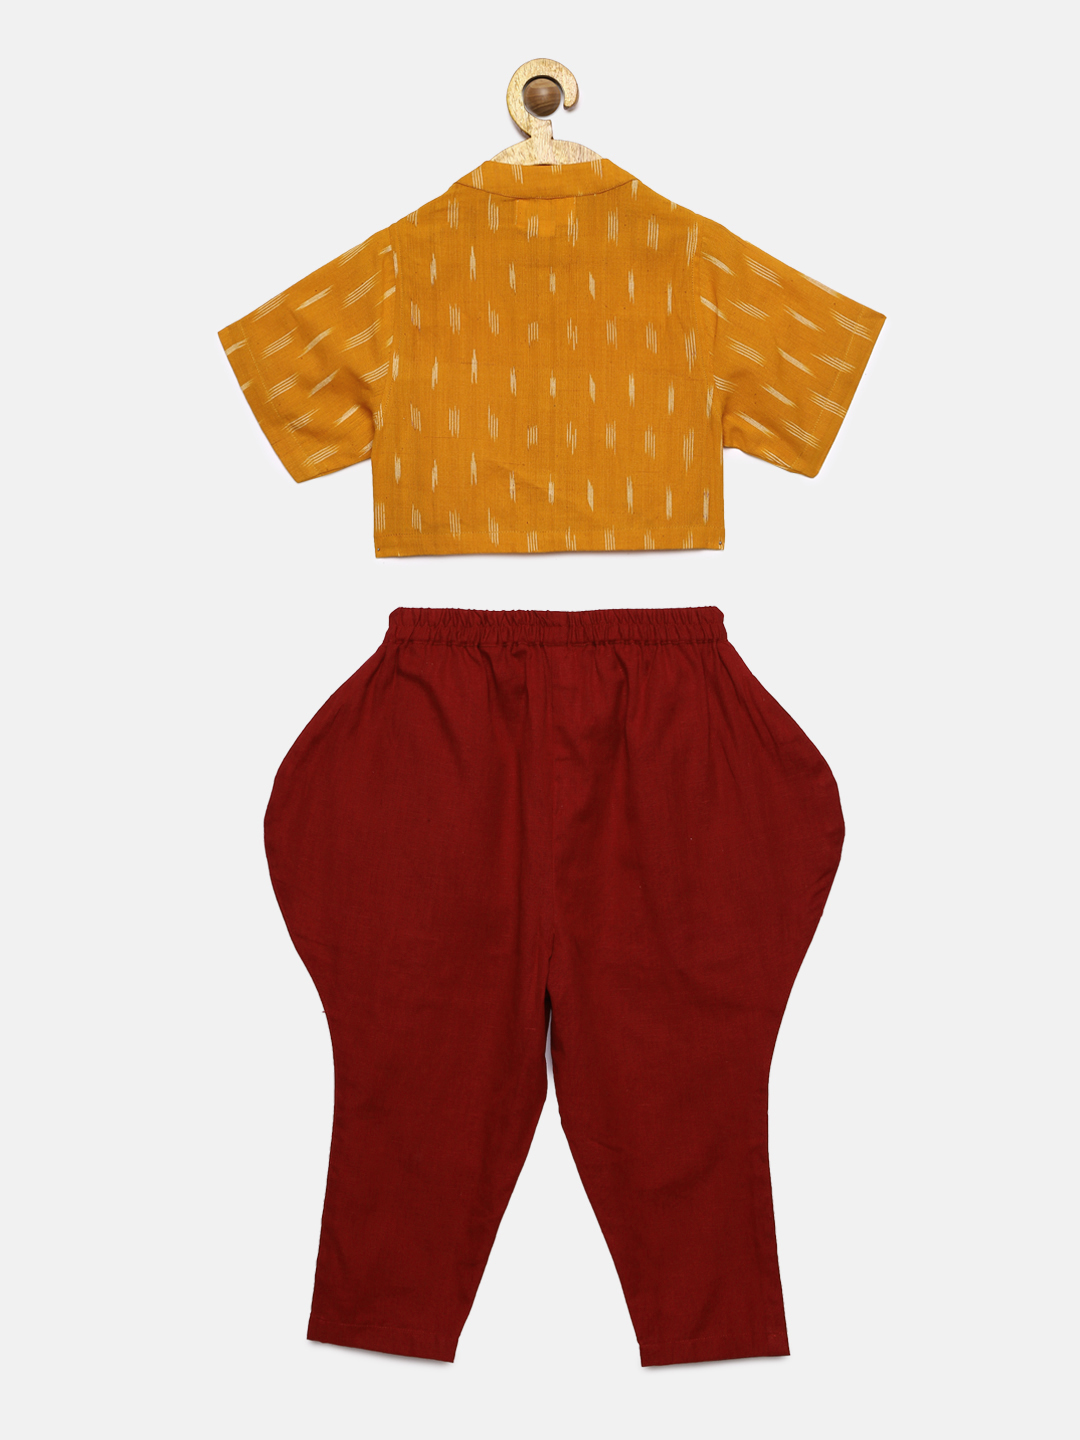 2 2 Ikat Crop Shirts with Baloons Pants- Yellow and Red